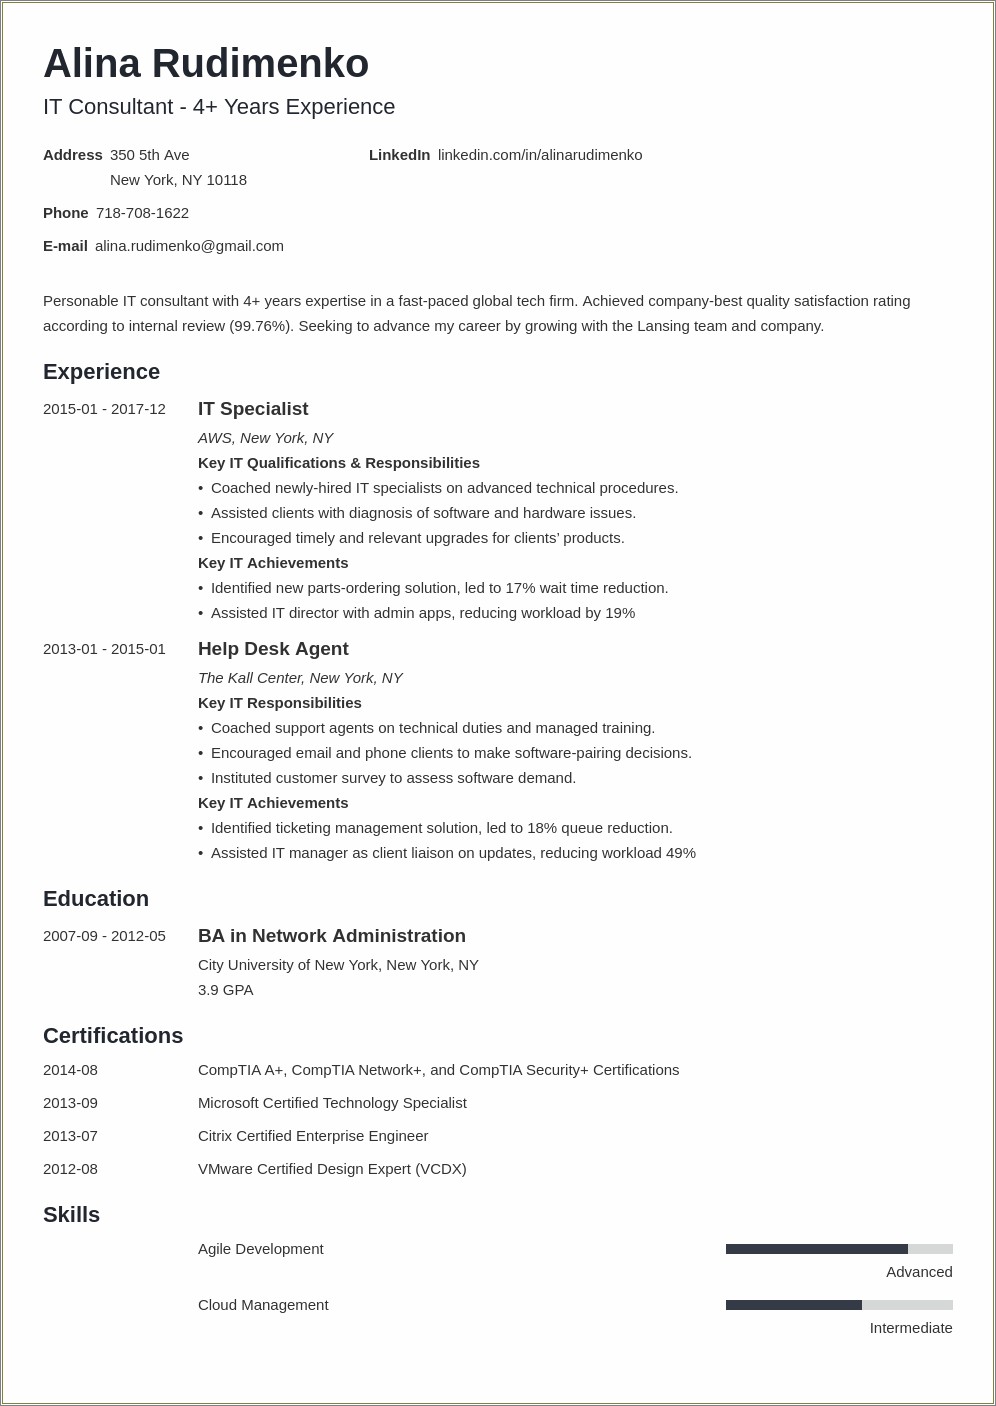 Resume Summary To Advance In The Company